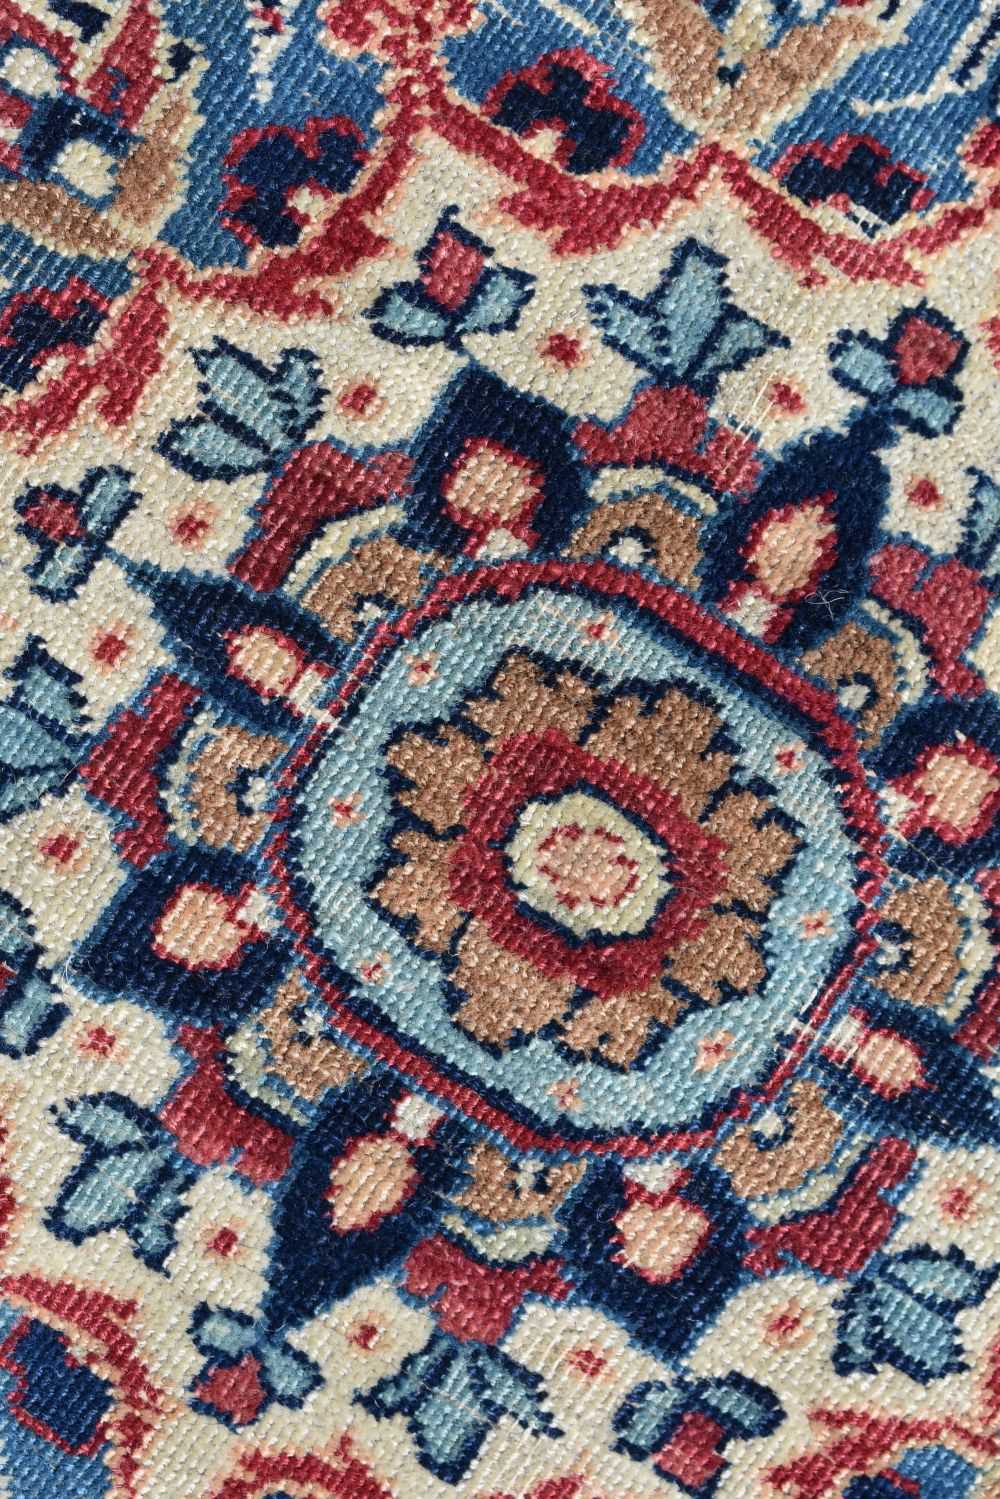 A Persian rug 189 x 122 cm - Image 6 of 14